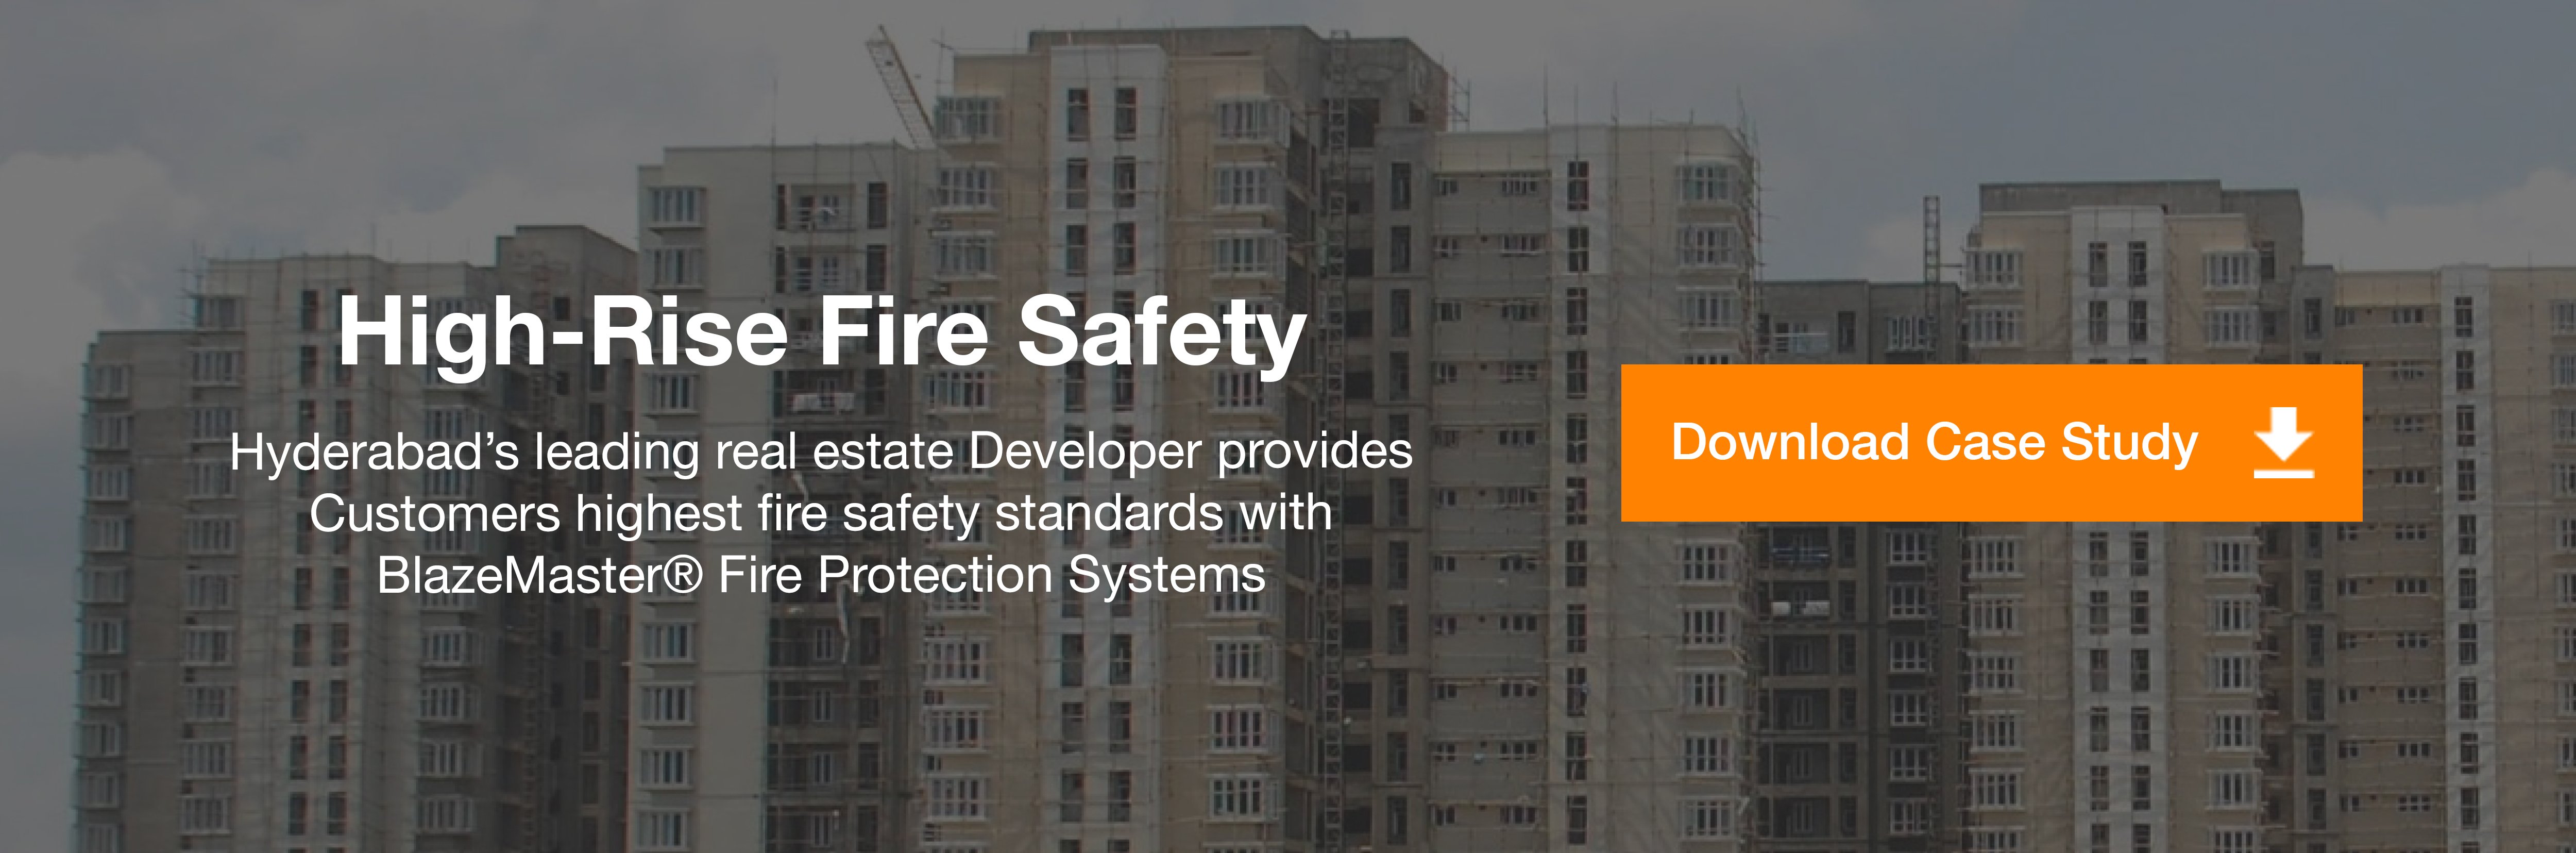 fire protection system case study hyderabad download cta